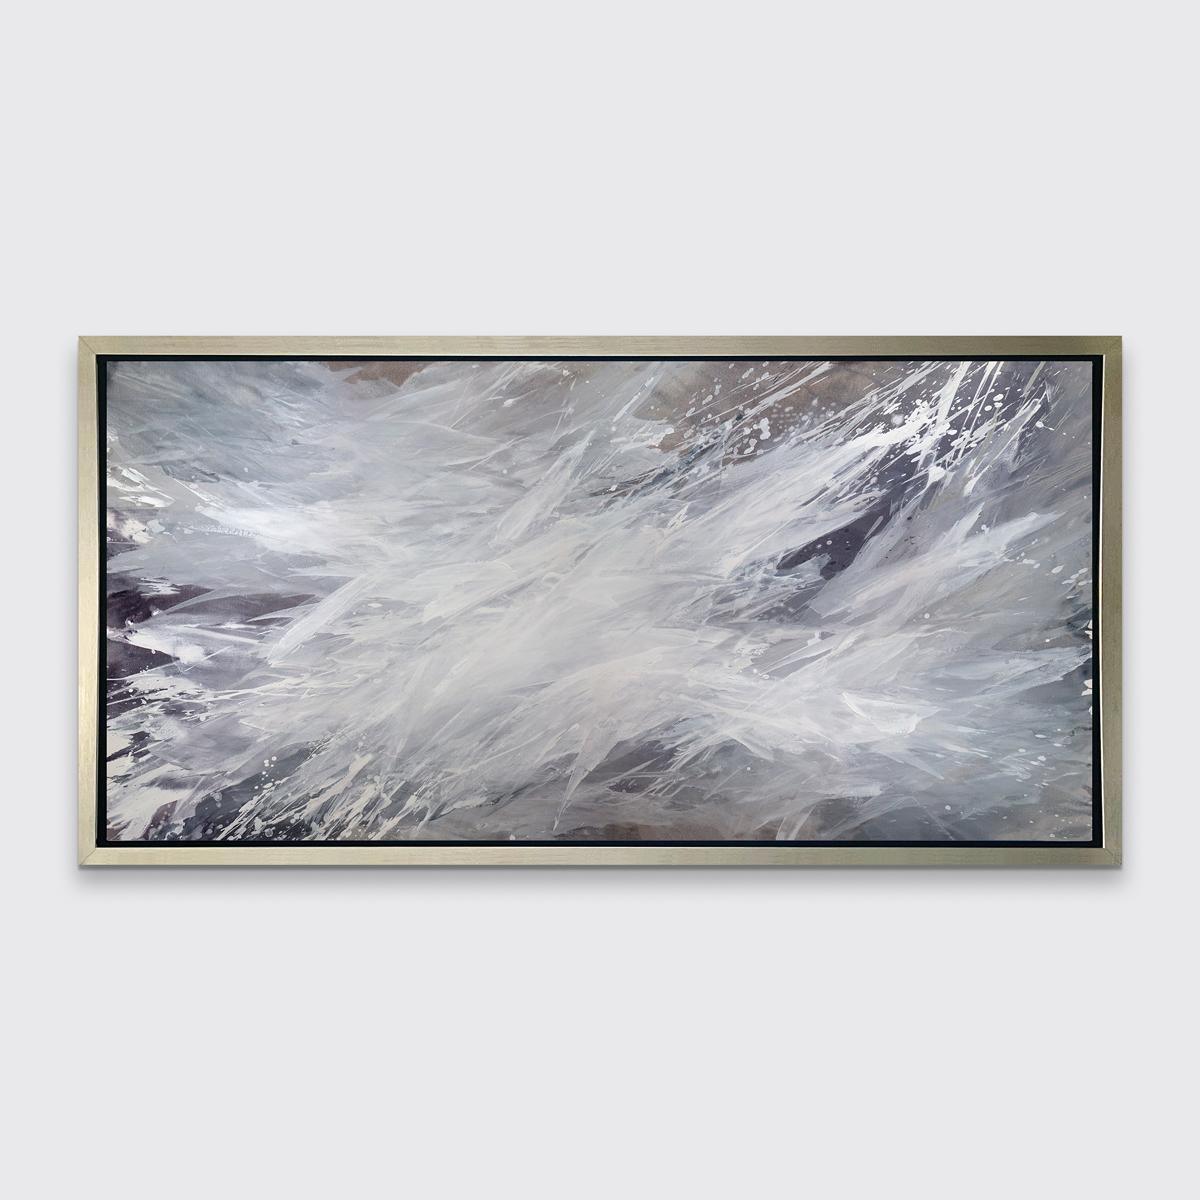 This abstract limited edition print by Teodora Guererra features splashes of white layered over earth tones and grey to create energetic movement that moves outward toward the edges of the composition. 

This Limited Edition giclee print by Teodora